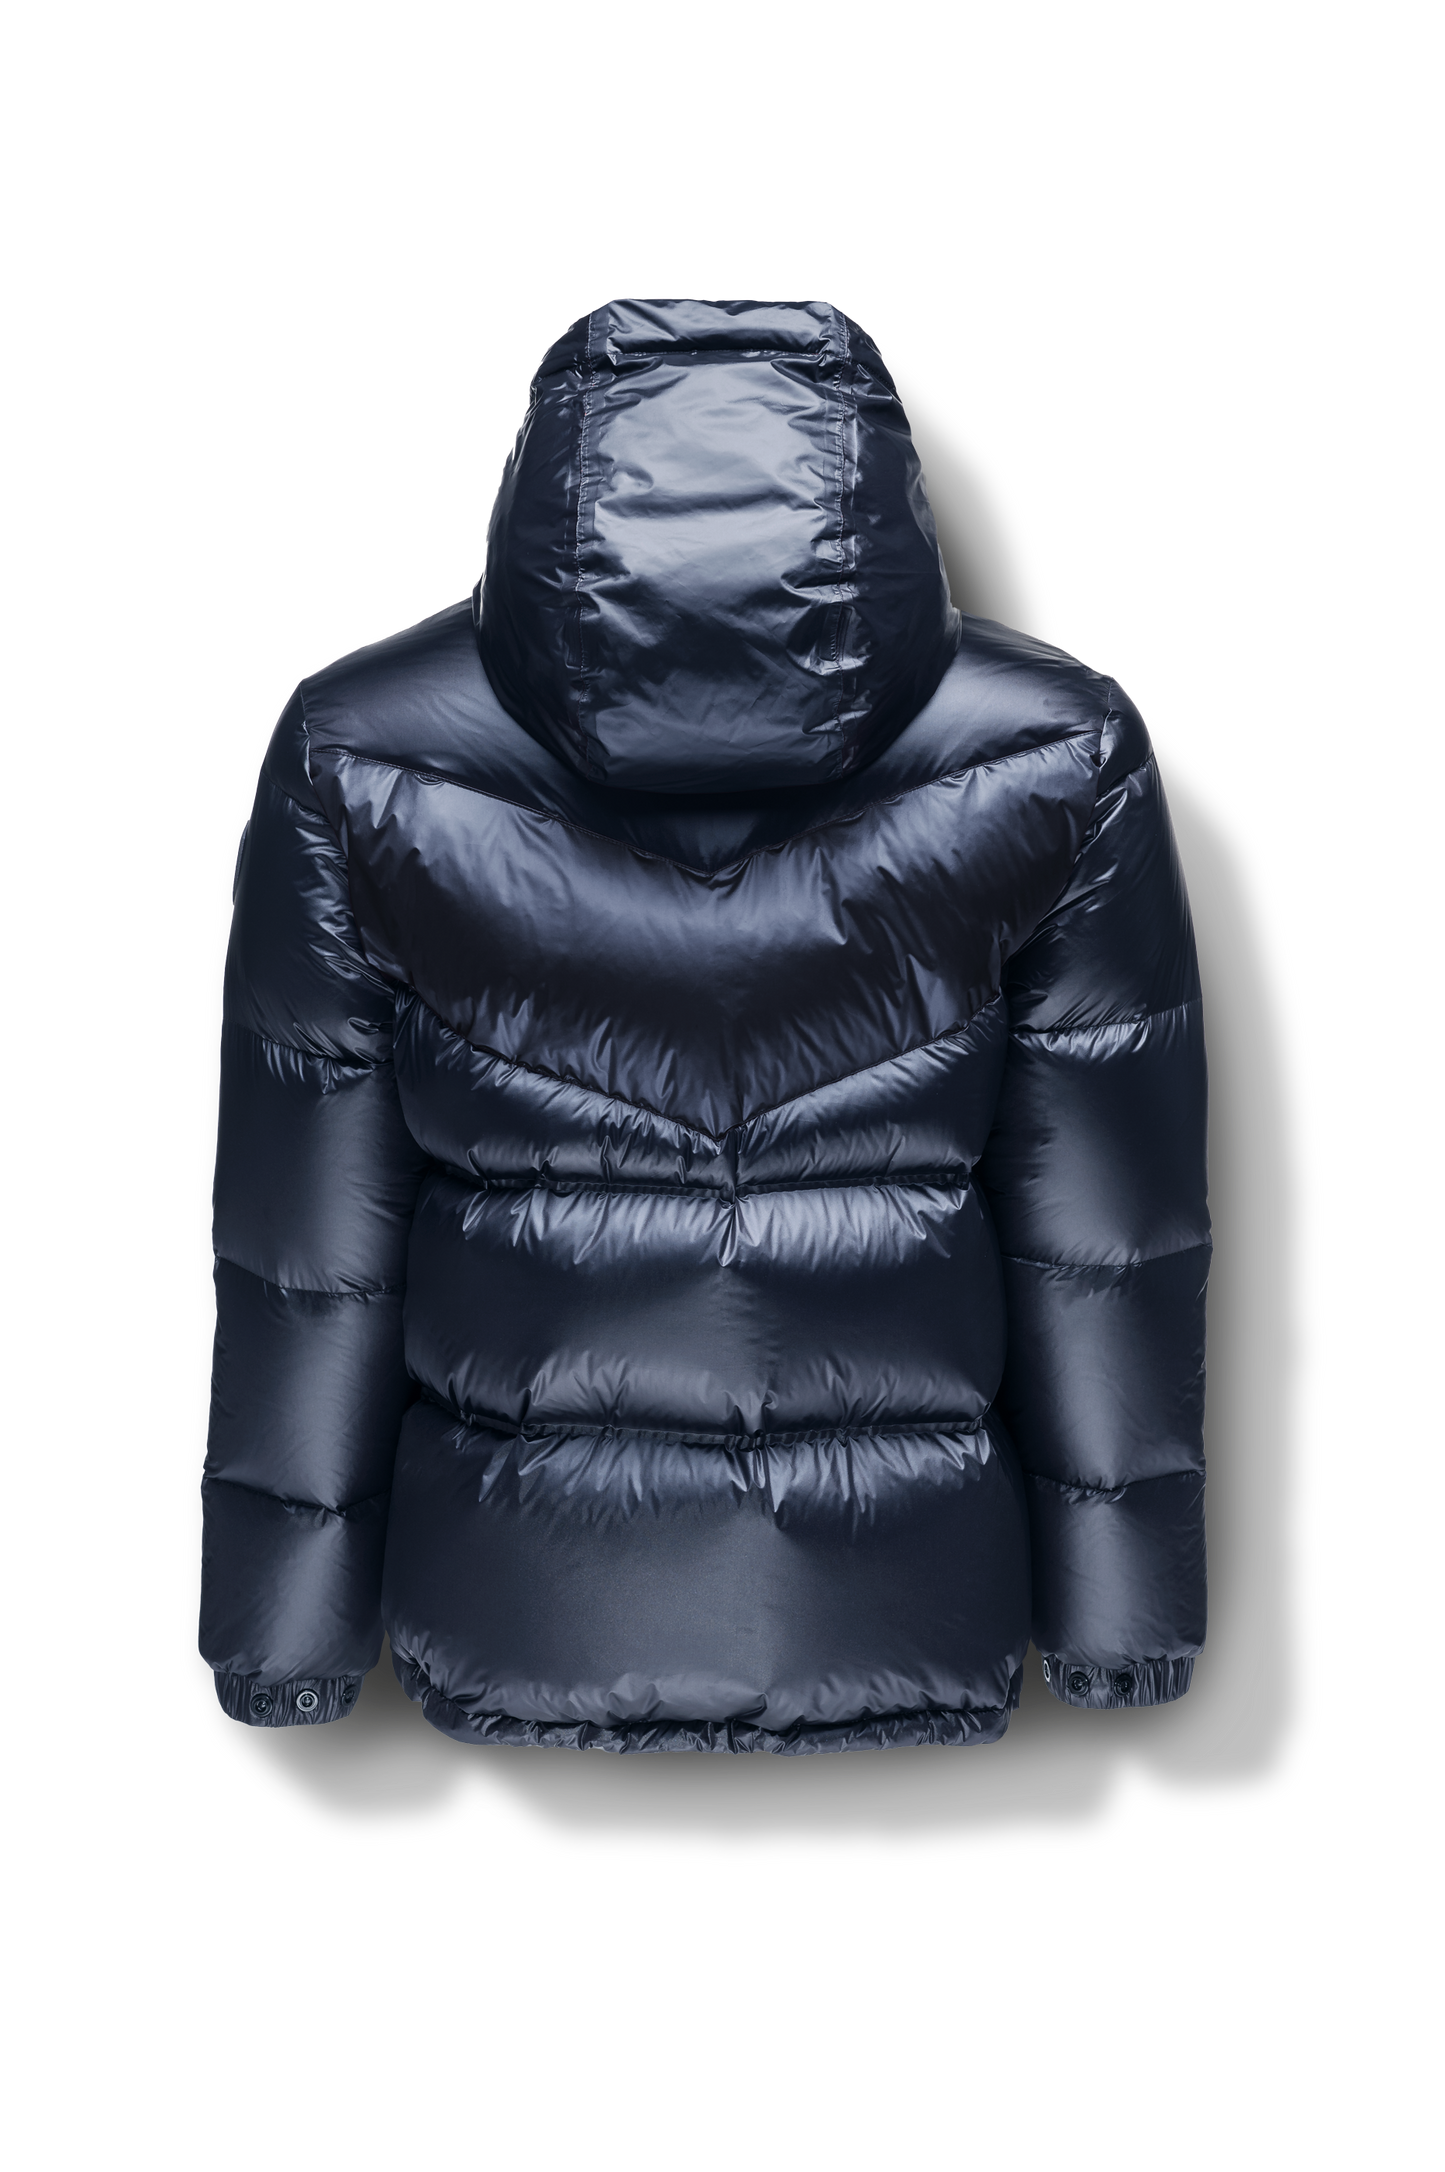 Dyna Men's Chevron Quilted Puffer Jacket in hip length, premium cire technical nylon taffeta fabrication, Premium Canadian origin White Duck Down insulation, non-removable down-filled hood, two-way centre-front zipper, fleece-lined zipper pockets at waist, pit zipper vents, in Navy